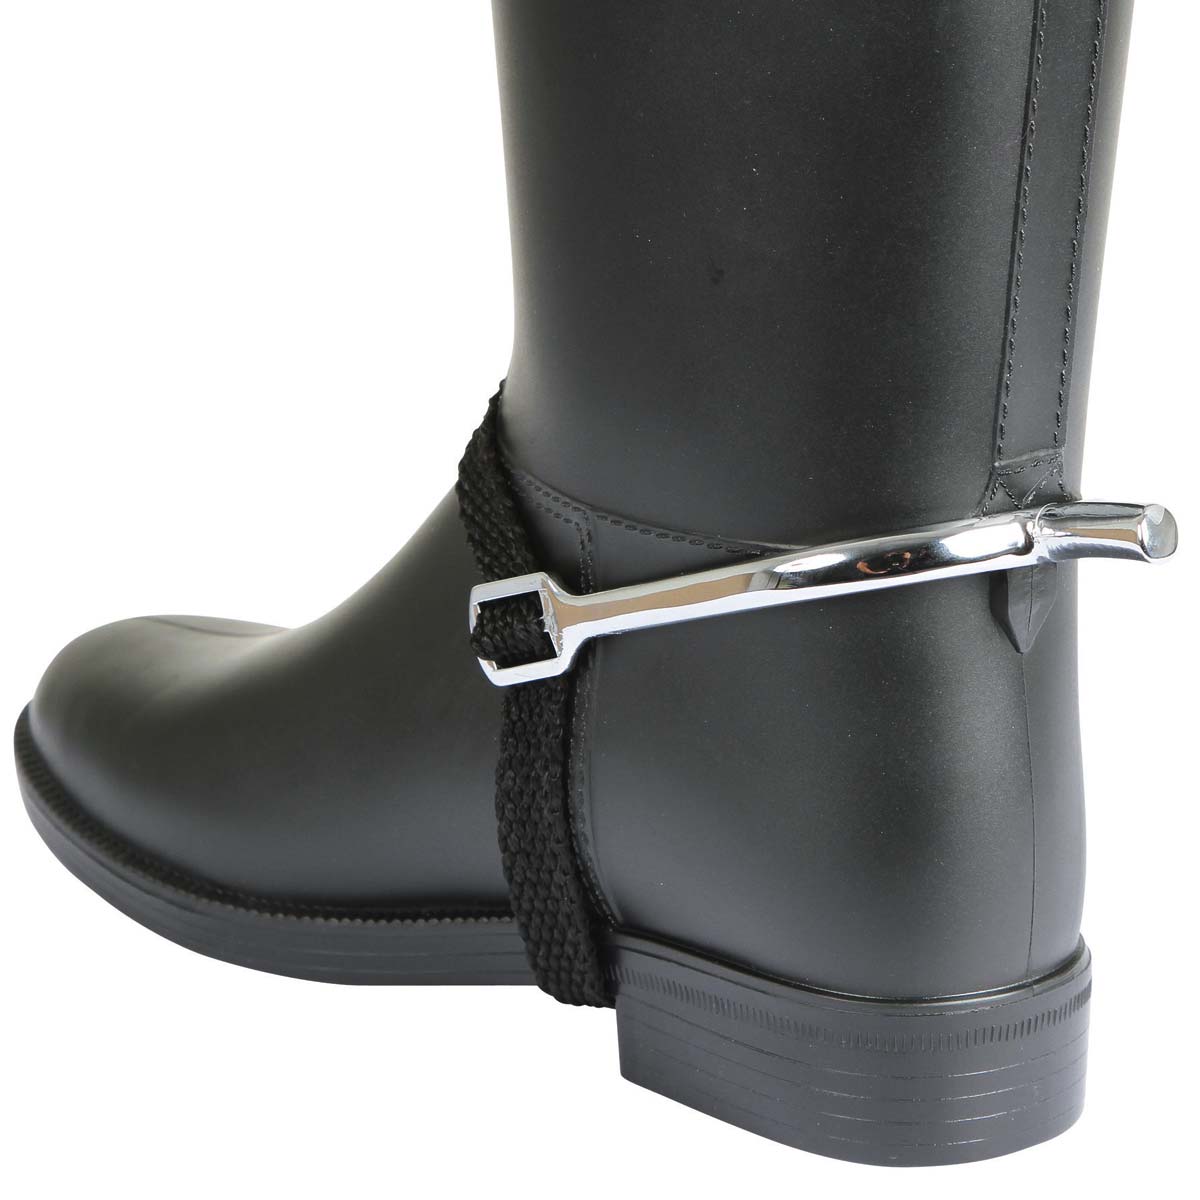 Covalliero spurs straight with straps for women